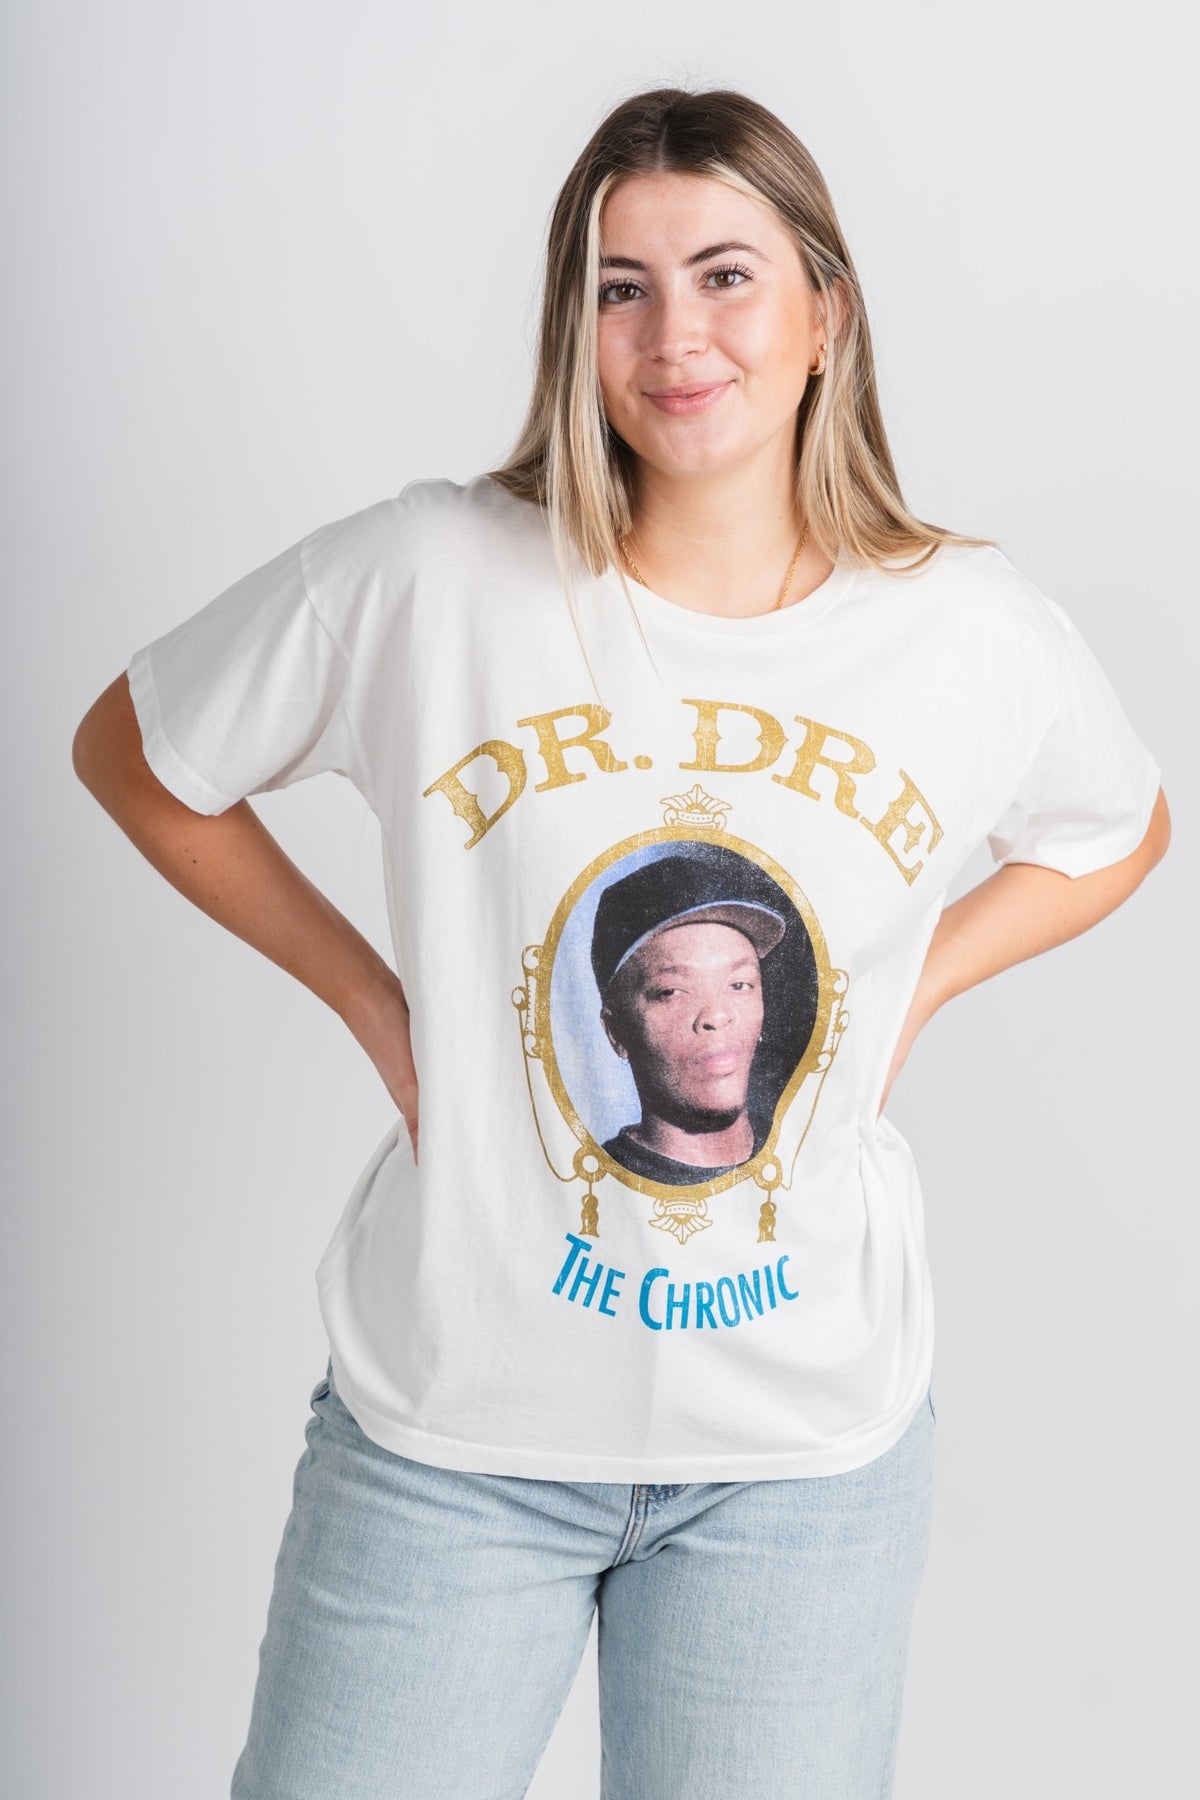 DayDreamer Dr. Dre the chronic merch t-shirt vintage white - Trendy Band T-Shirts and Sweatshirts at Lush Fashion Lounge Boutique in Oklahoma City